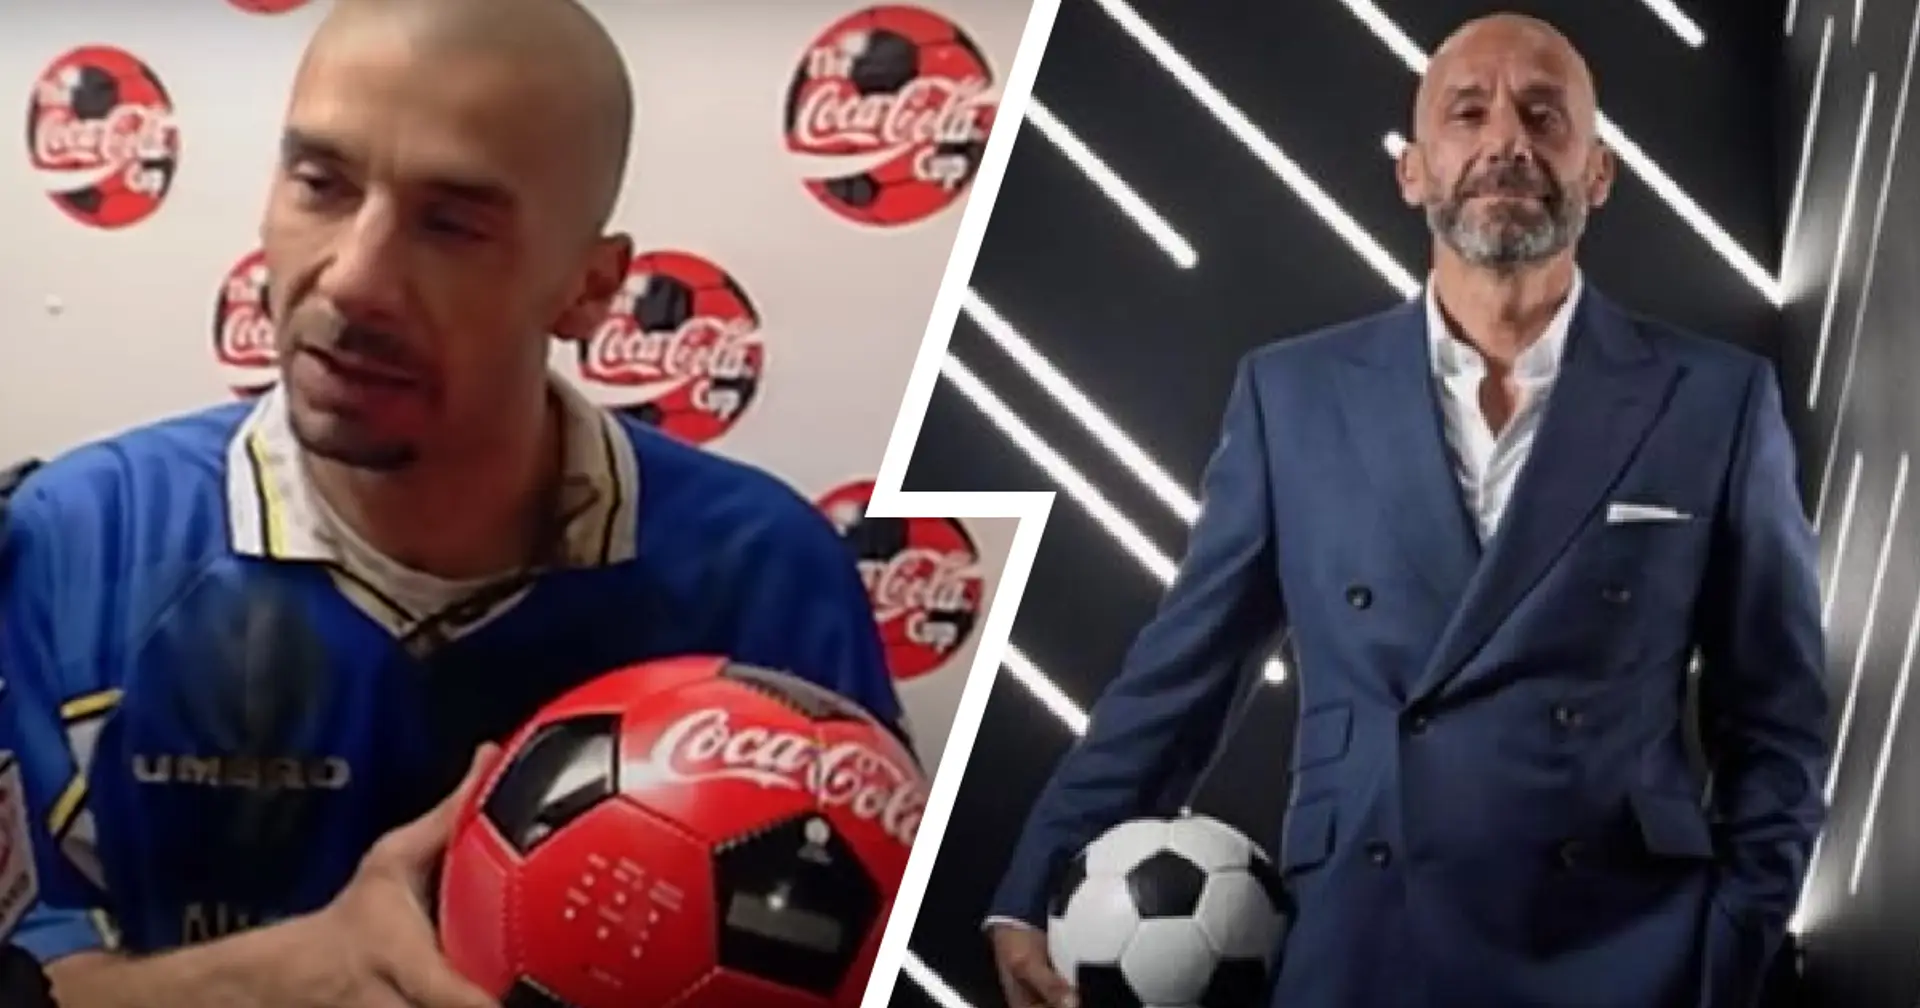 Gianluca Vialli once received fancy CD player for MOTM performance as Chelsea player-manager (video)